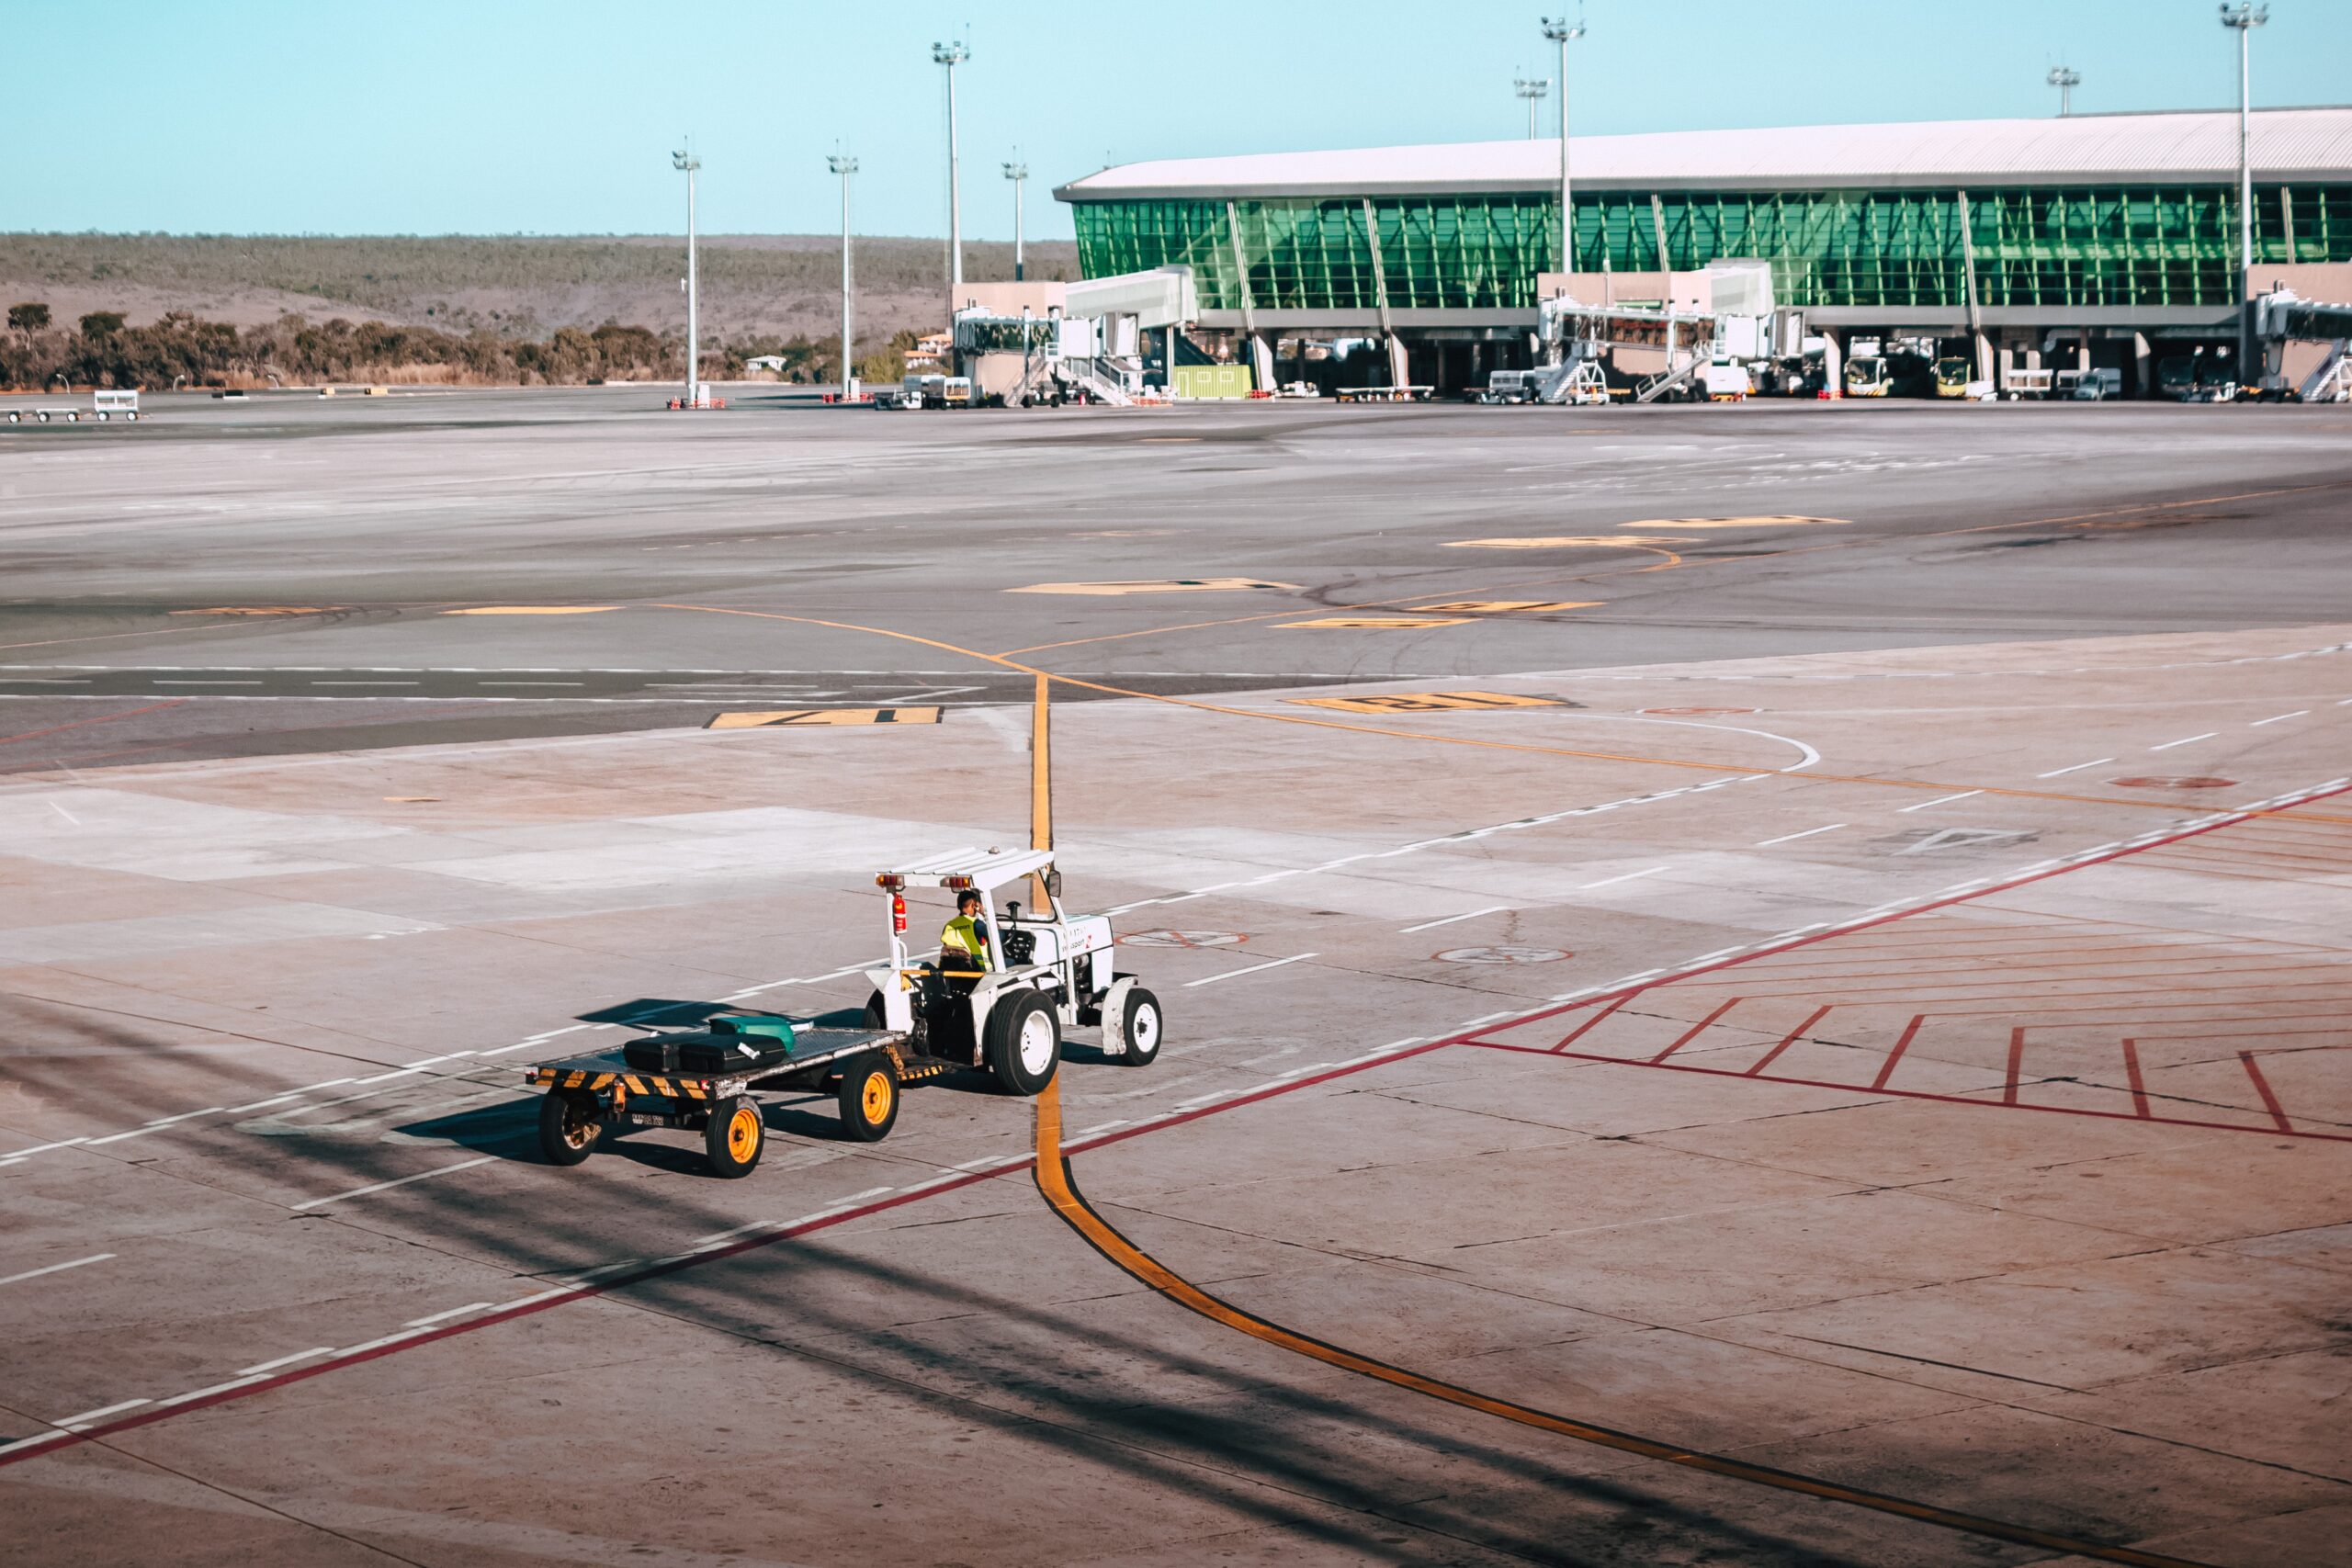 A small service vehicle hauls a trailer on an airport tarmac.